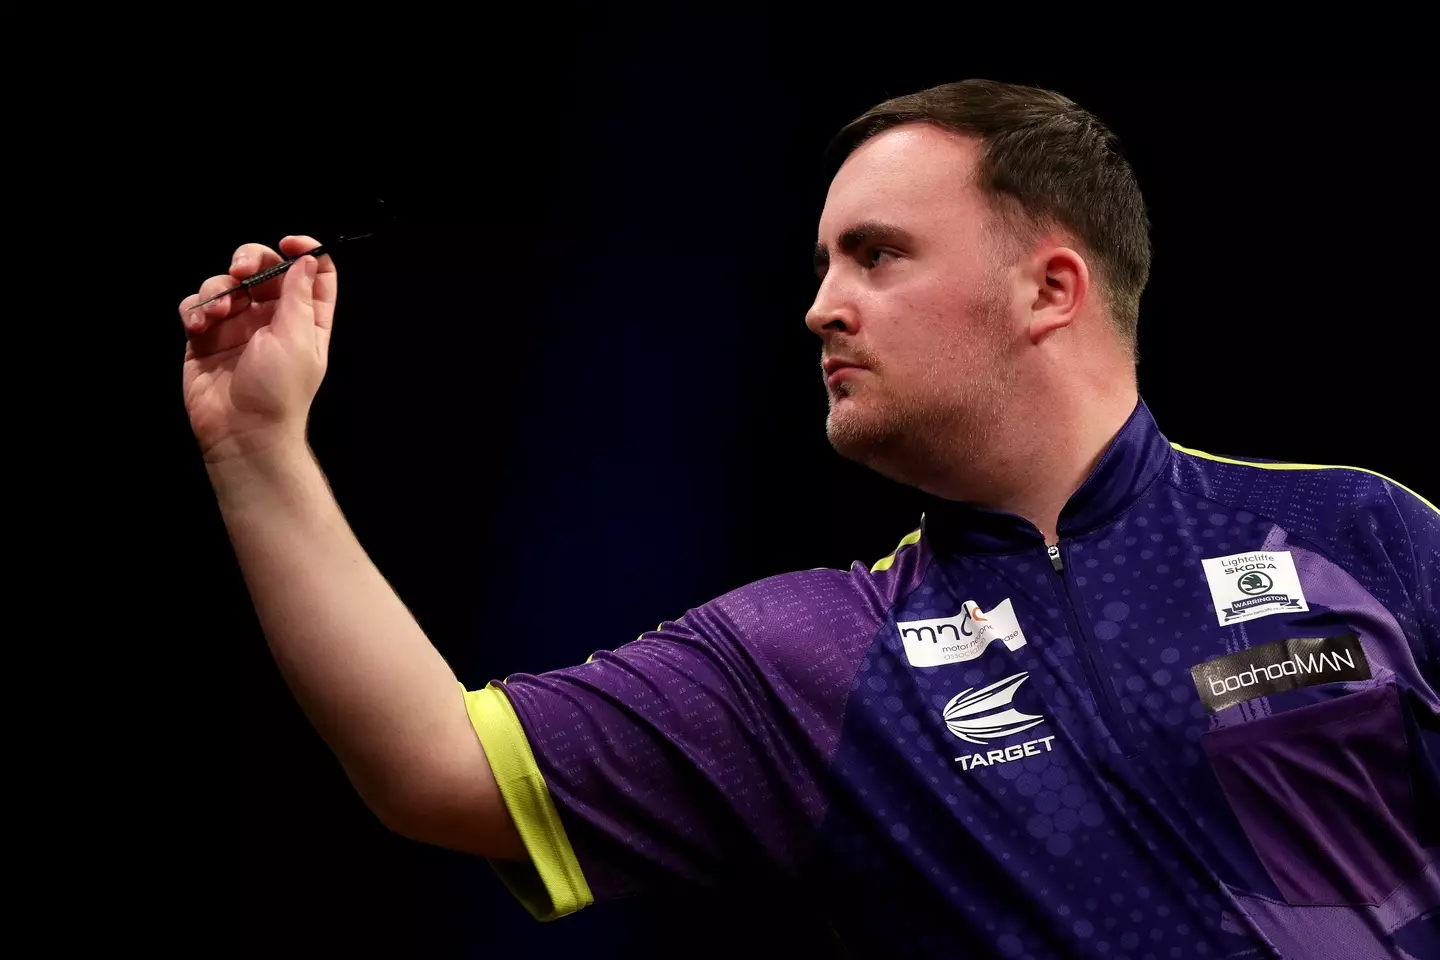 Littler has become one of the biggest names in the world of darts (Getty)